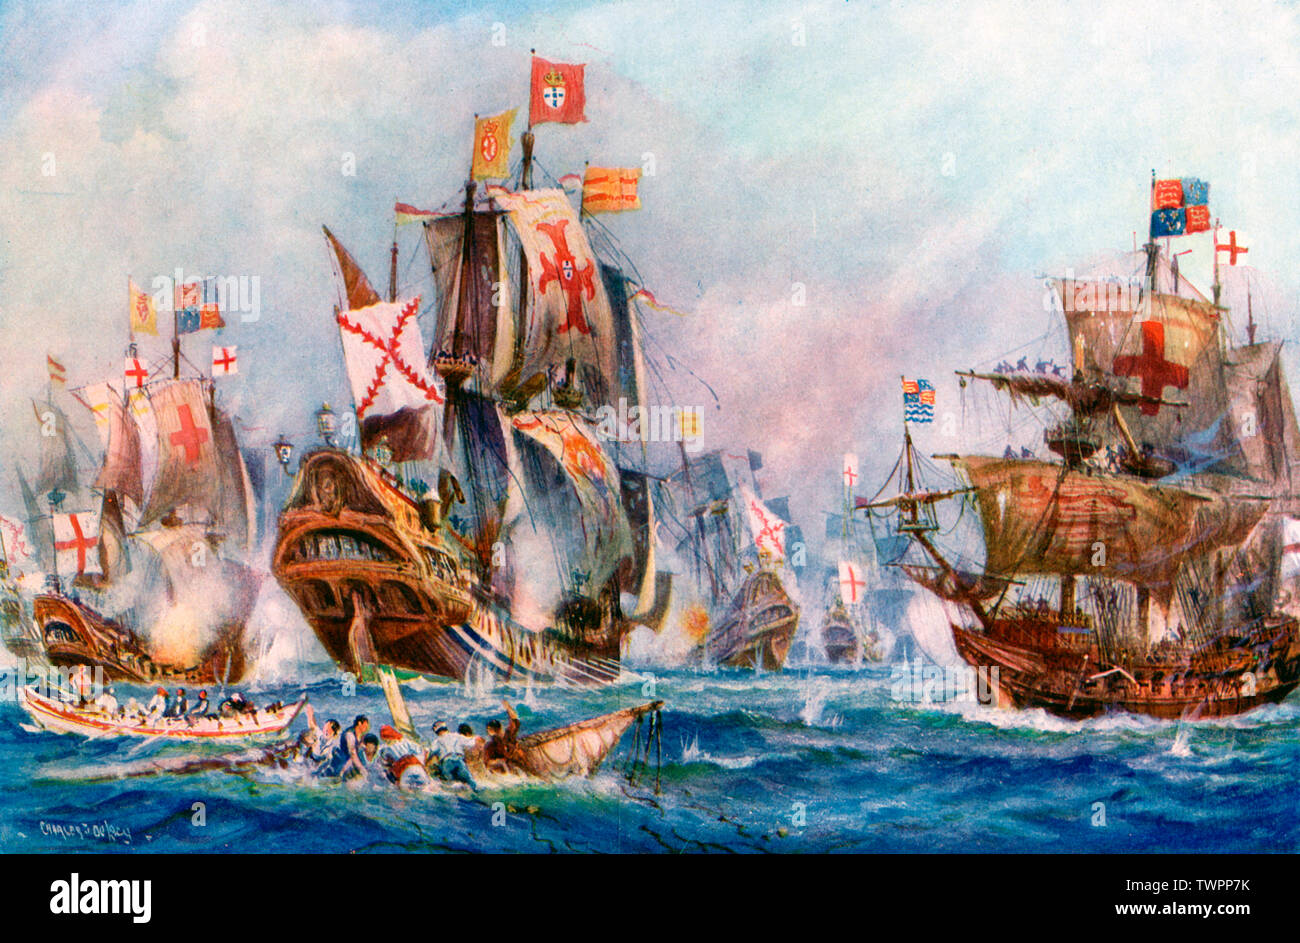 'The Glorious Victory of Elizabeth's seamen over the Spanish Armada, 1588'. By Charles De Lacy (1856-1929). The Spanish Armada was a Spanish navy fleet famously used by King Philip II of Spain (1527-1598) to attack Britain in 1588. It was defeated by the Royal Navy of England under command of Sir Francis Drake (c1540-1596), during the reign of Queen Elizabeth I (1533-1603). Stock Photo